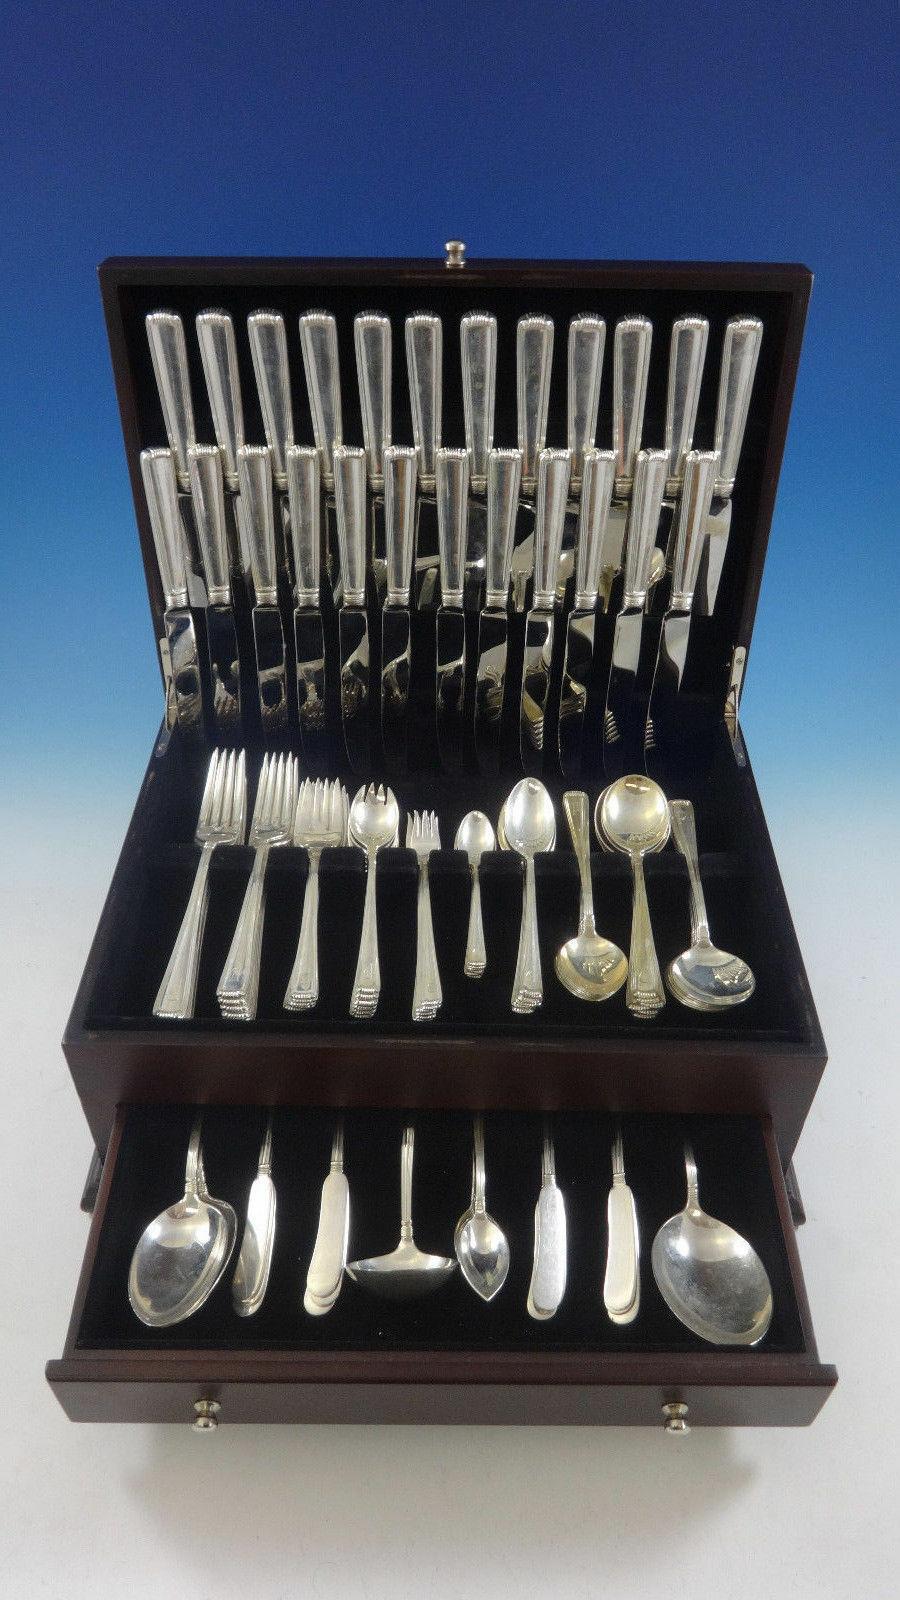 Monumental Marie Louise by Cartier sterling silver flatware set, 175 pieces. This set includes:

12 dinner size knives, 9 1/2